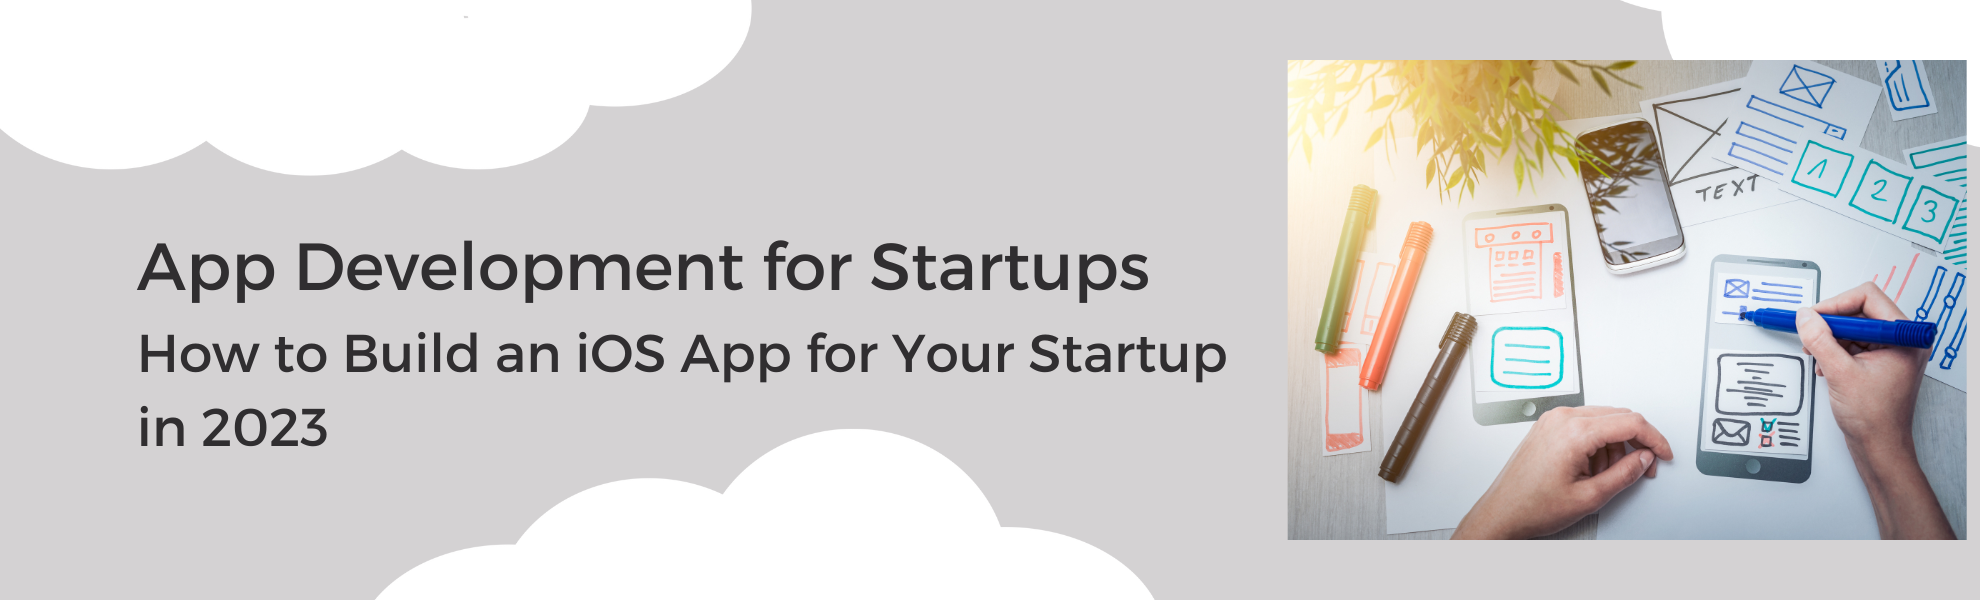 App Development for Startups - How to Build an iOS App for Your Startup in 2023